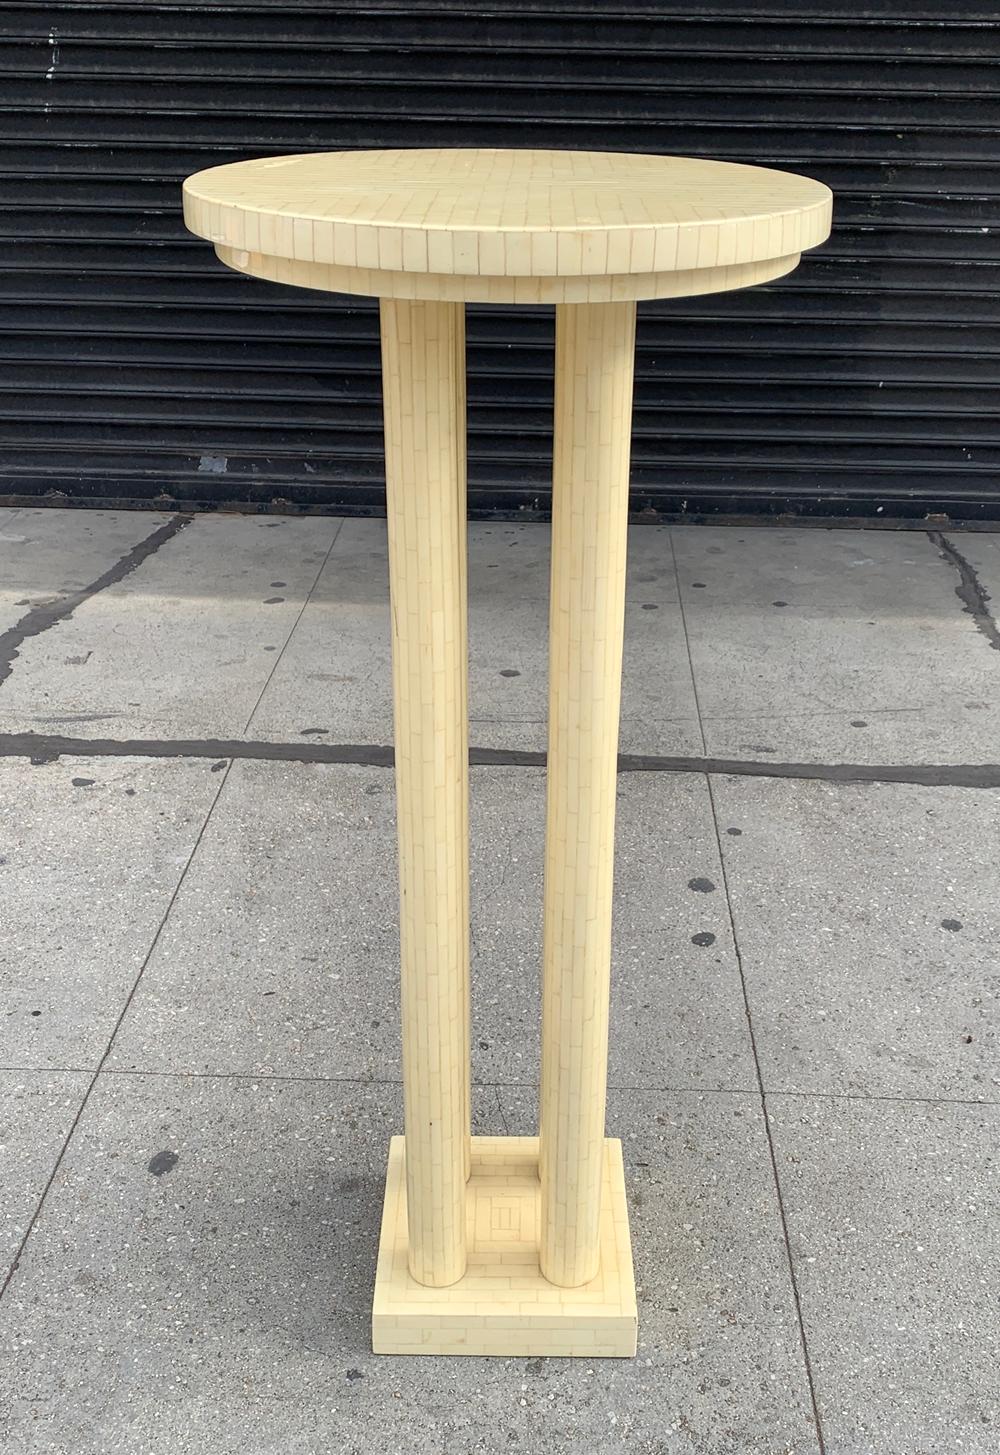 Mid-Century Modern Tall Pedestal Table in Tessellated Bone Tile by Enrique Garcel for Jimeco